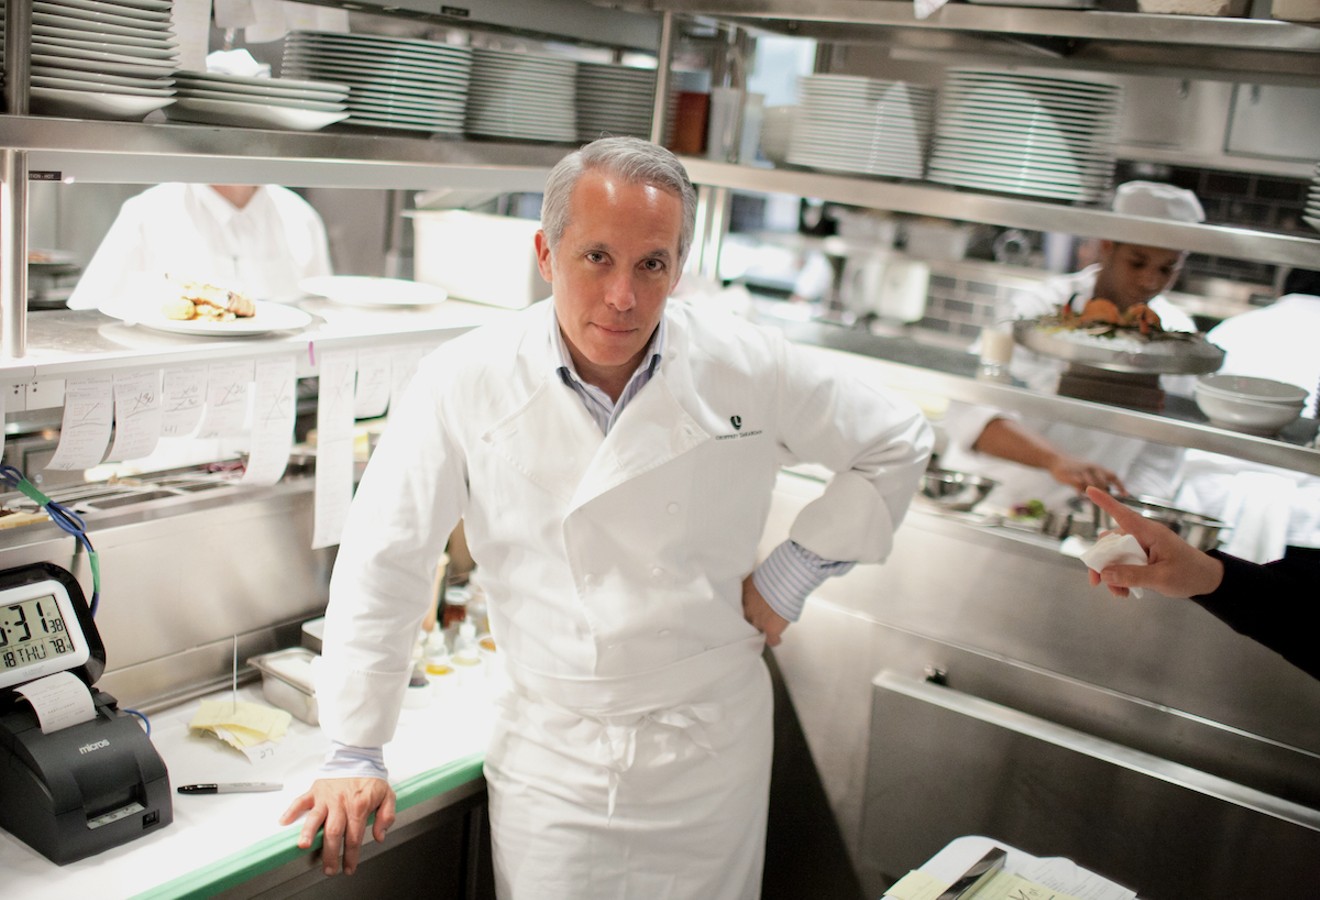 Celebrity chef Geoffrey Zakarian will open his latest concept, Point Royal, at Hollywood's Diplomat Resort.